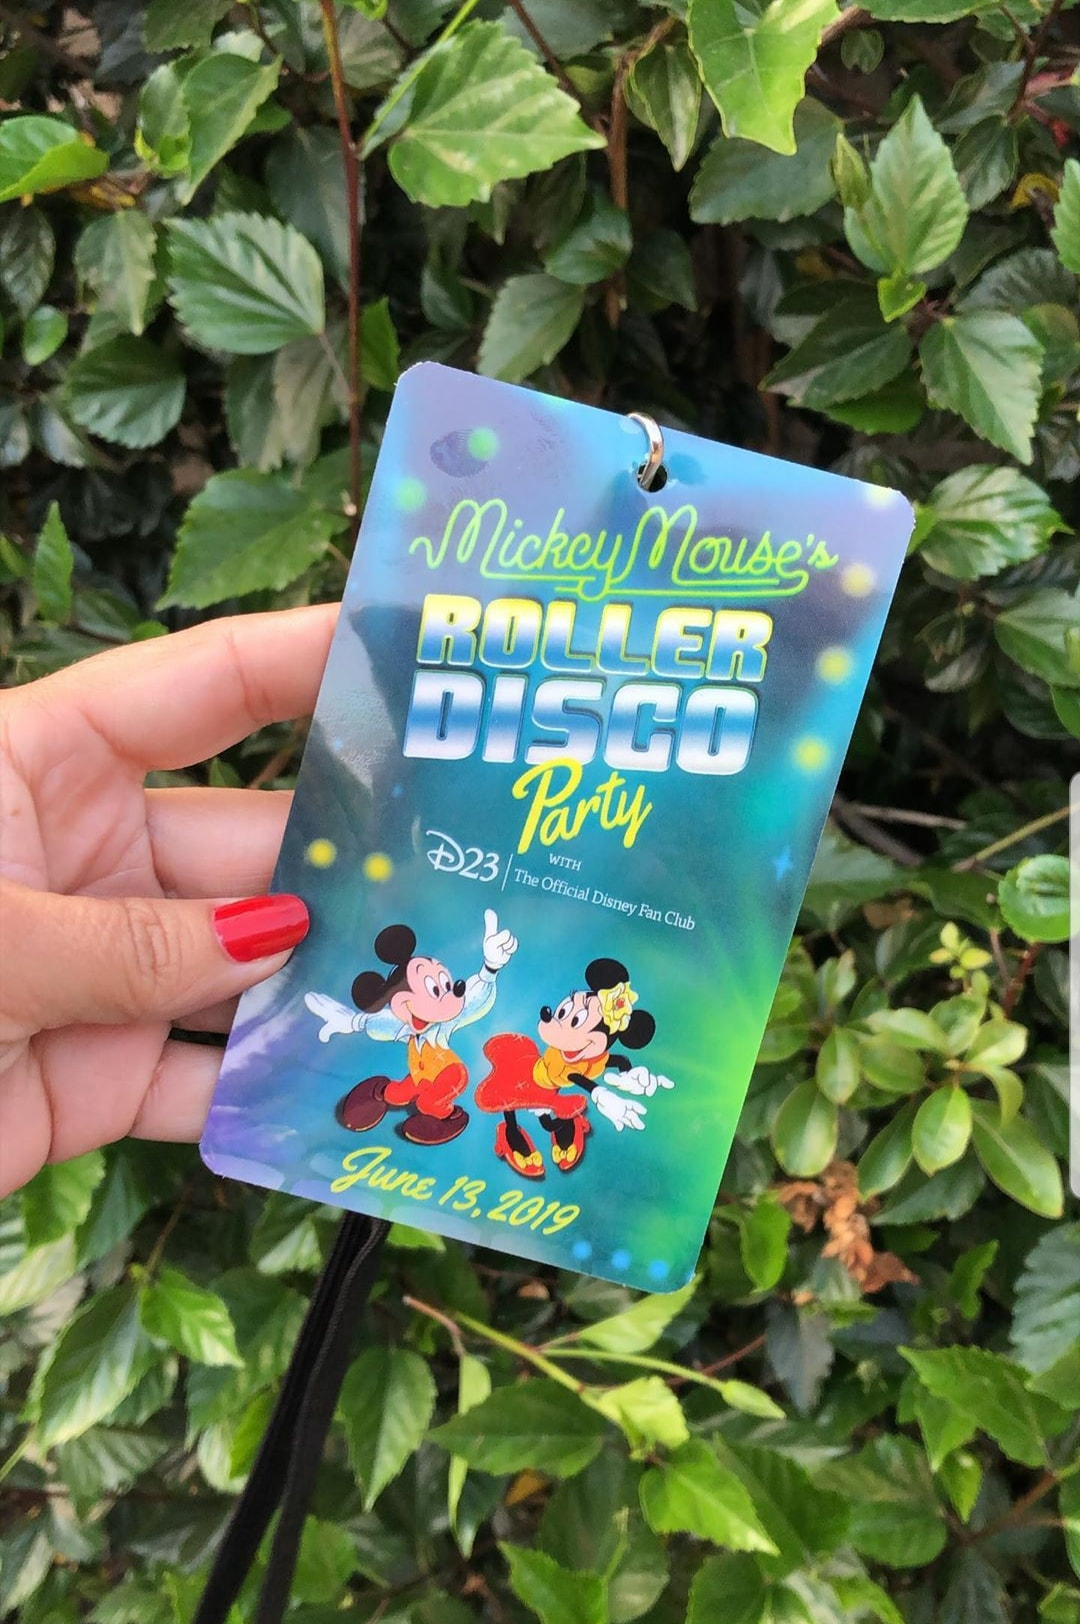 Mickey’s Disco Night will be at San Diego Comic Con